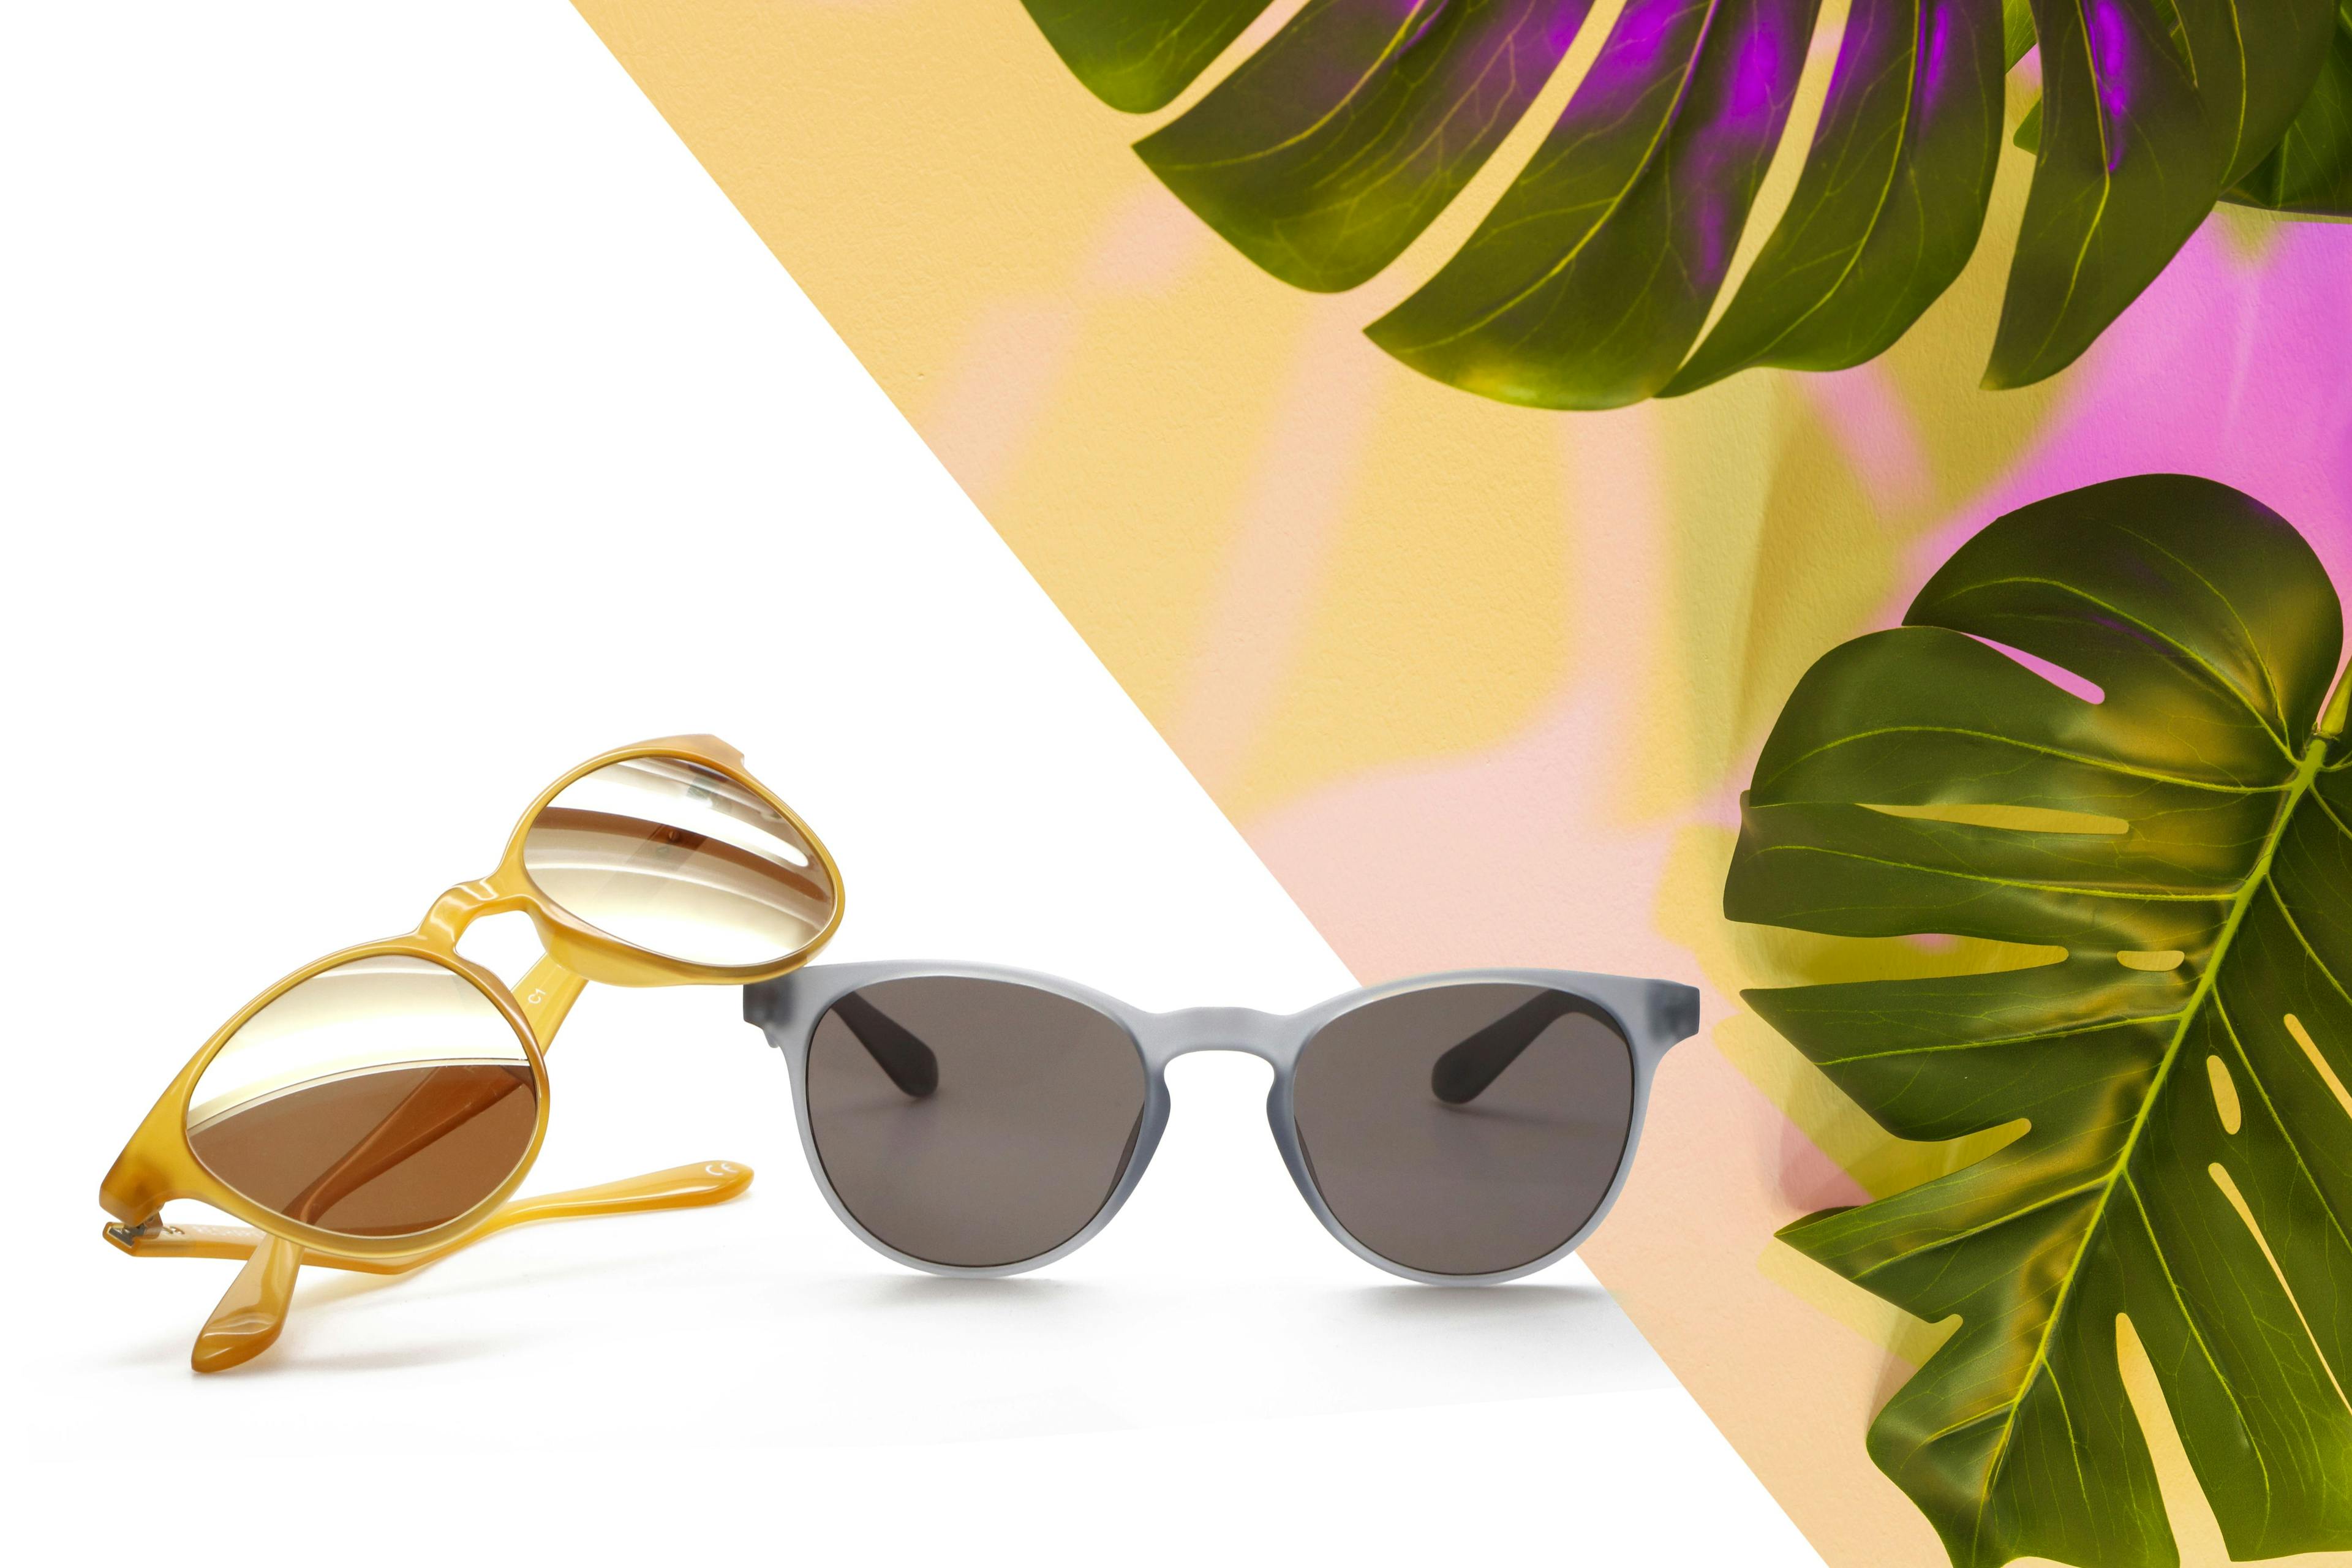 Okia Optical releases new Reshape eyewear collection made from recycled bottles